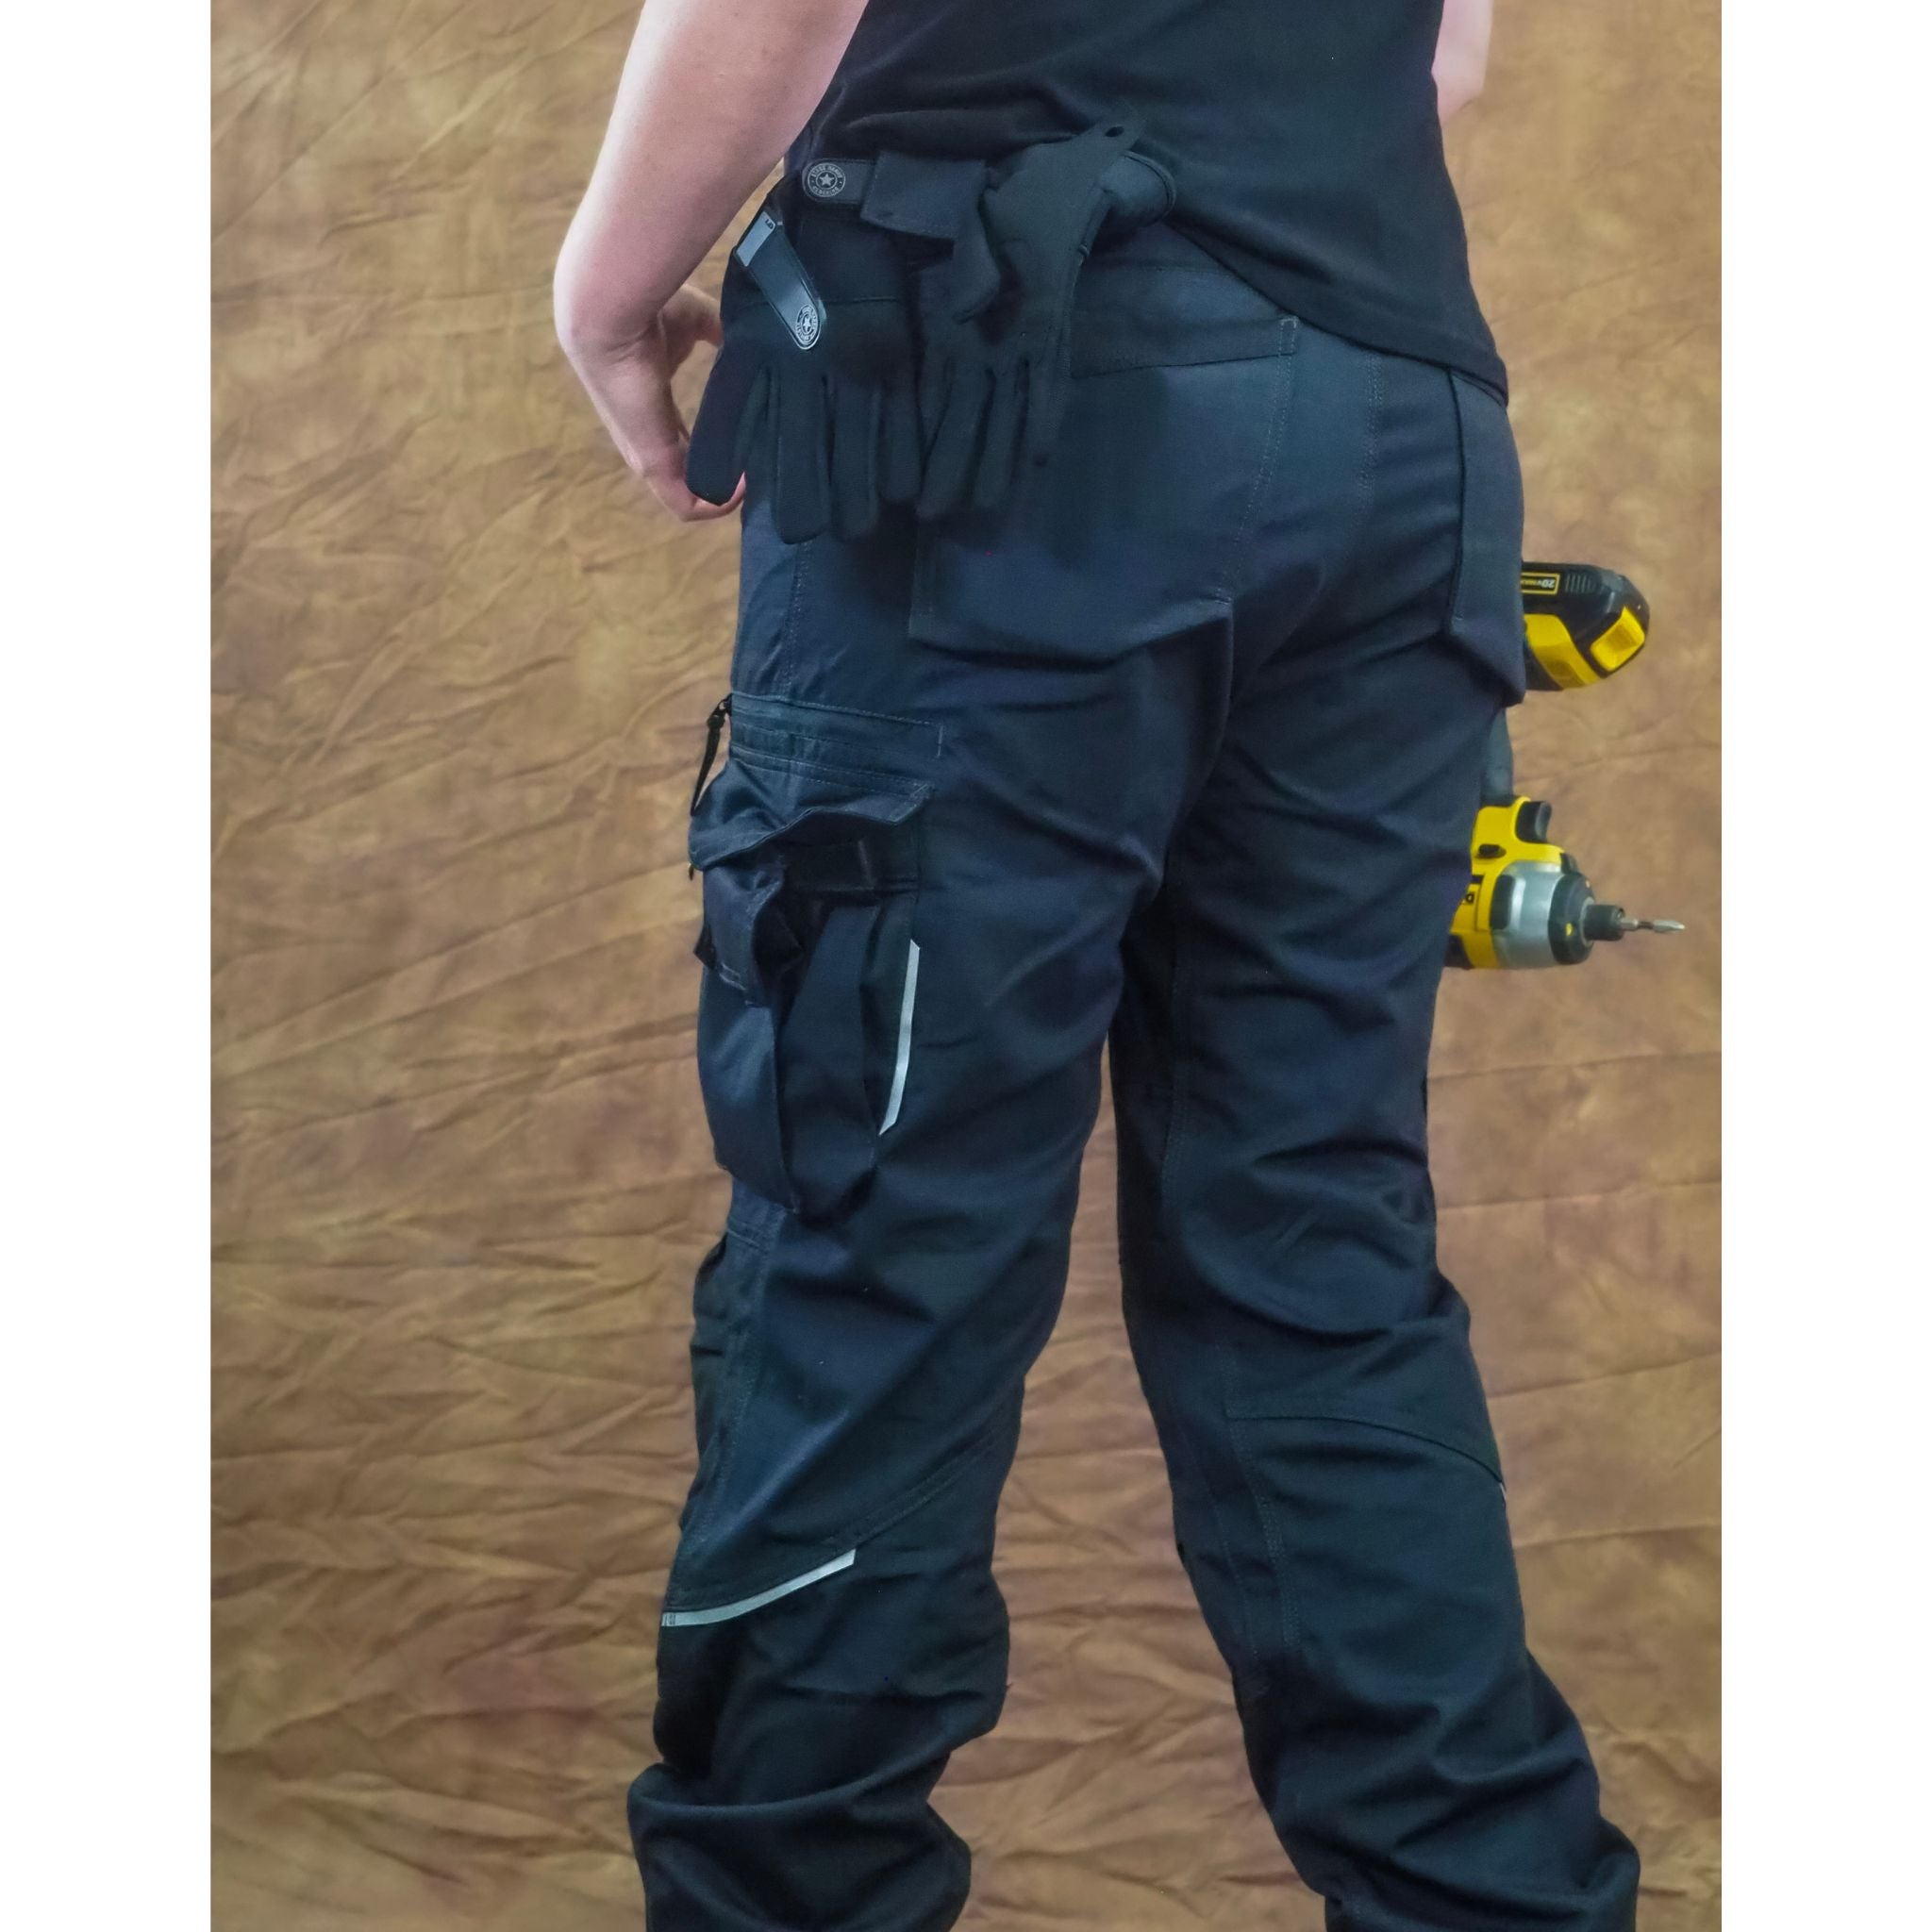 Women's black work pants with eleven useful pockets